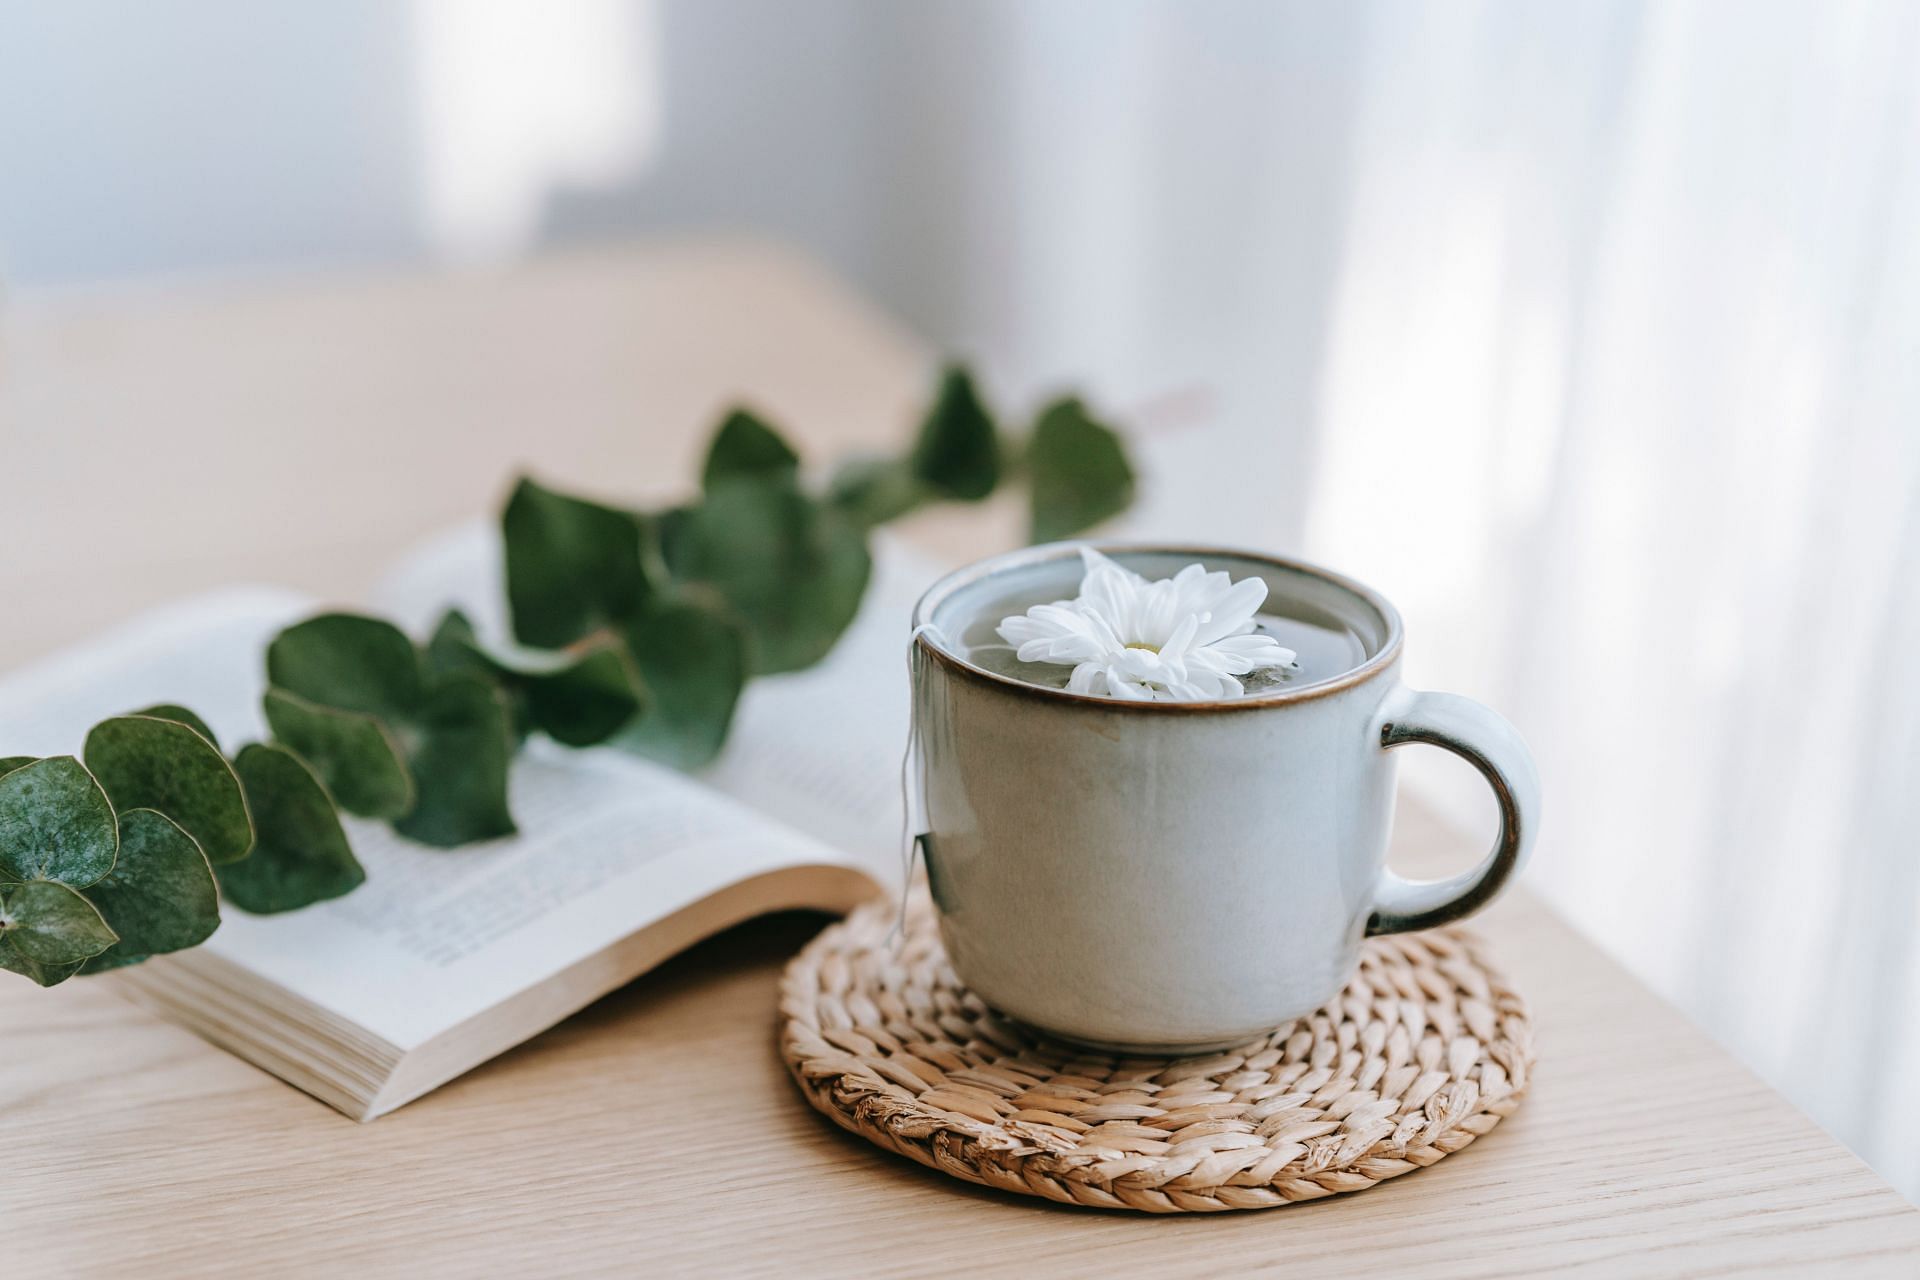 Eucalyptus tea has been suggested as a therapy for bronchitis and sore throat (Image via Pexels/Teona Swift)